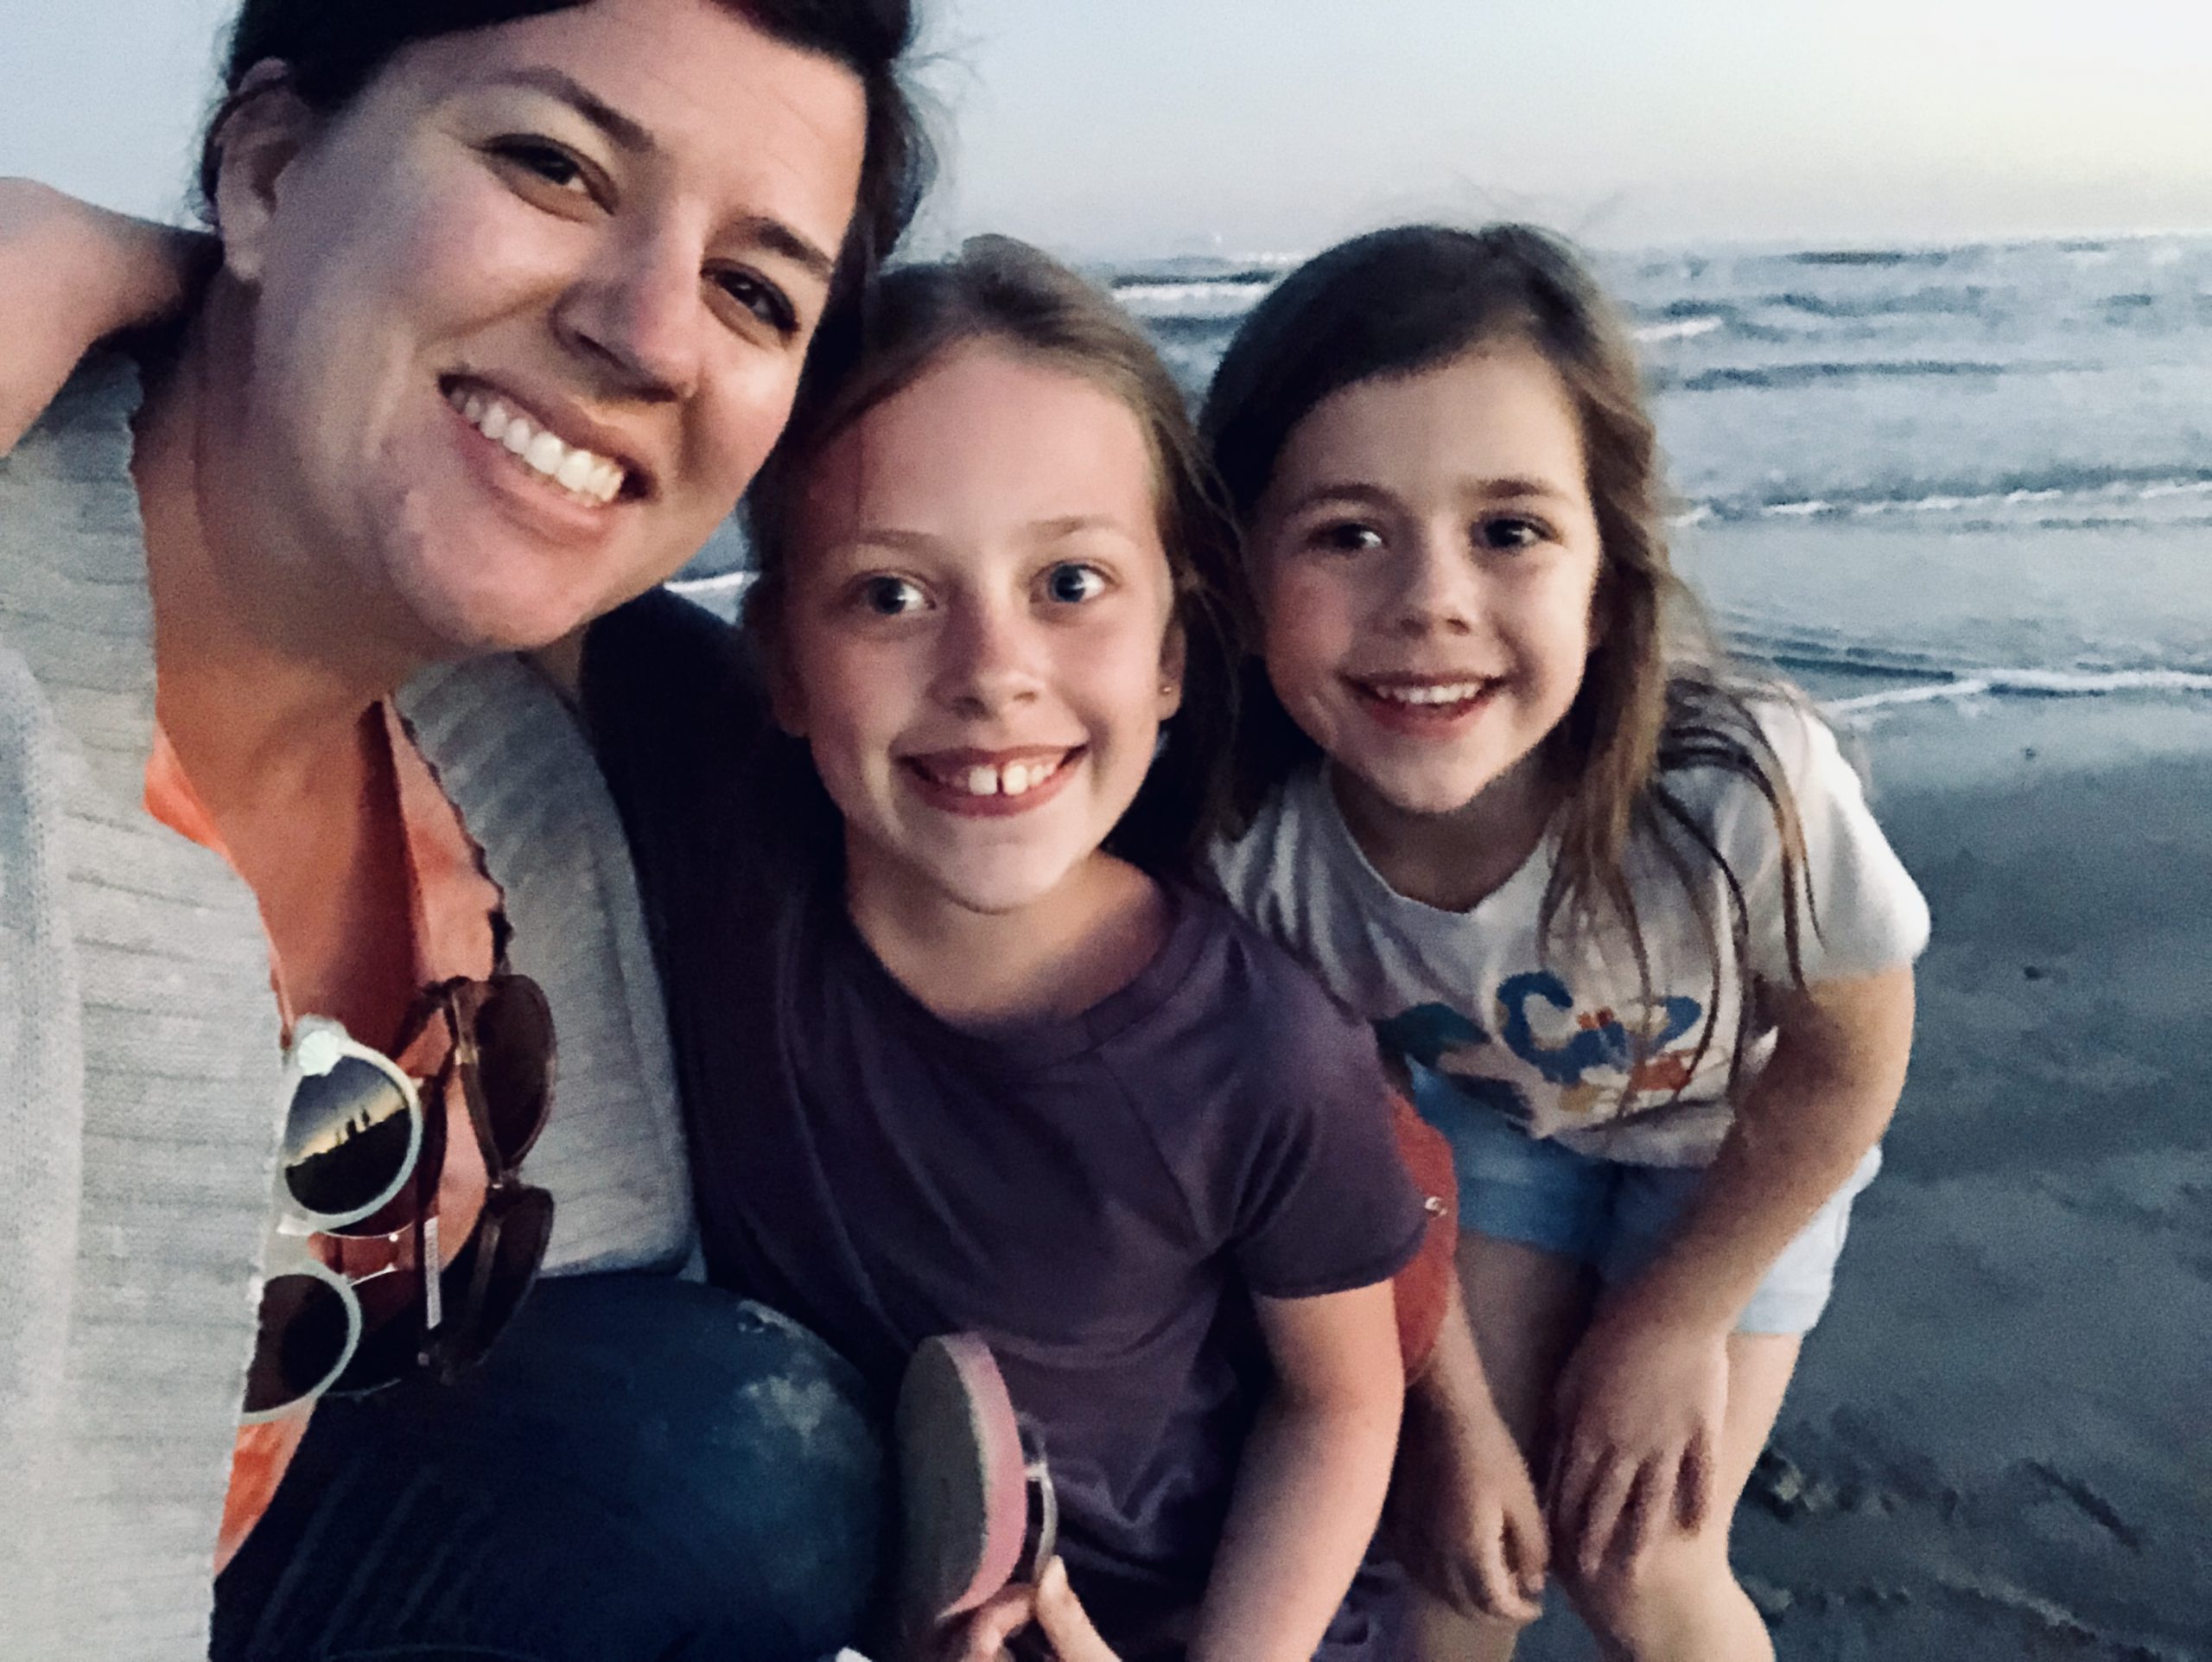  selfie of mom and 2 daughters at beach, lessons from inspirational women